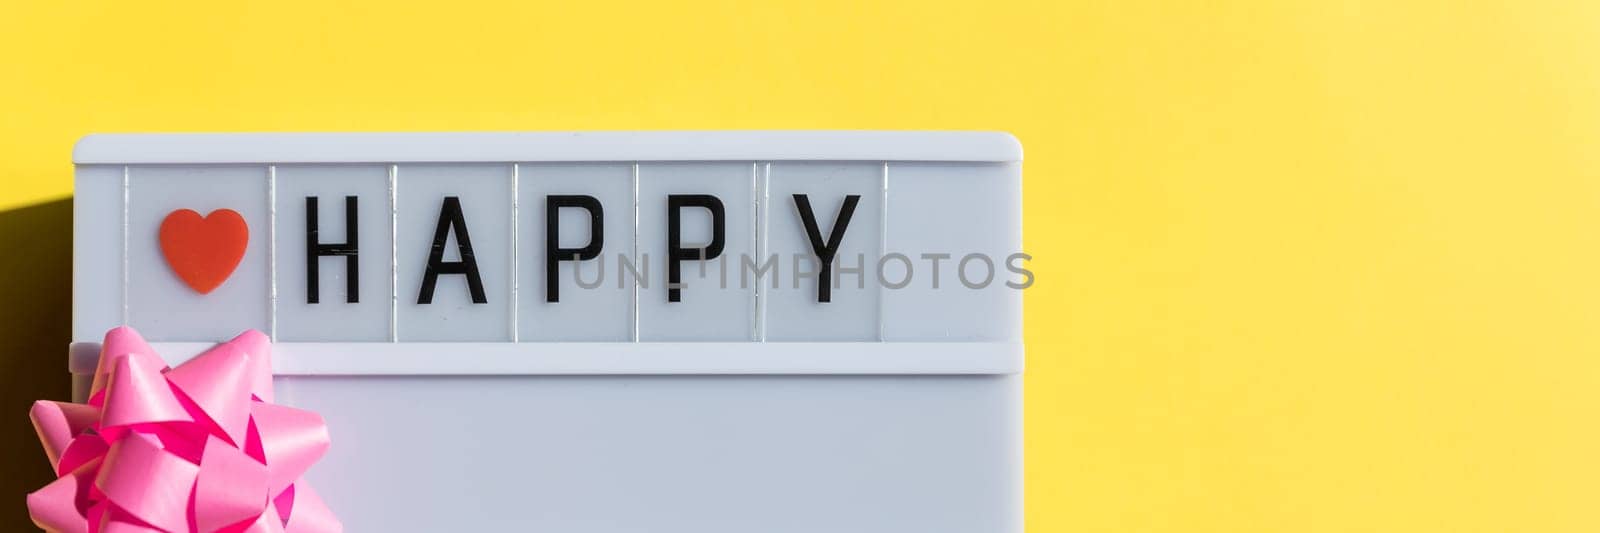 Happy day sign on light box on yellow backround.Happy Parents Day or International Day of Families.greeting card. Invitation for wedding.Stylish text frame lightbox with the inscription. web banner by YuliaYaspe1979